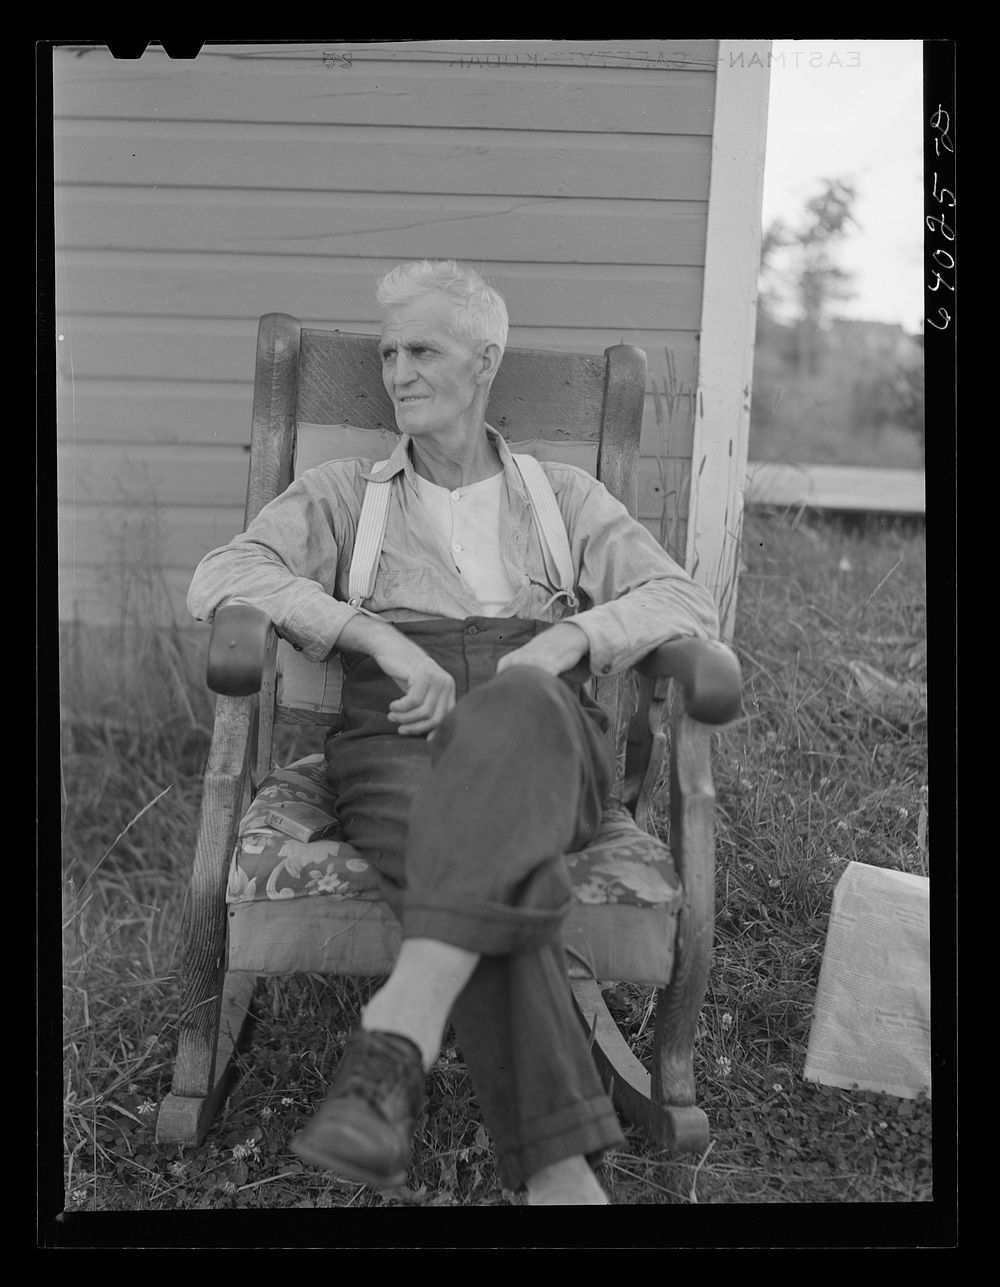 Old lumberjack. Trout Creek, Michigan. Sourced from the Library of Congress.